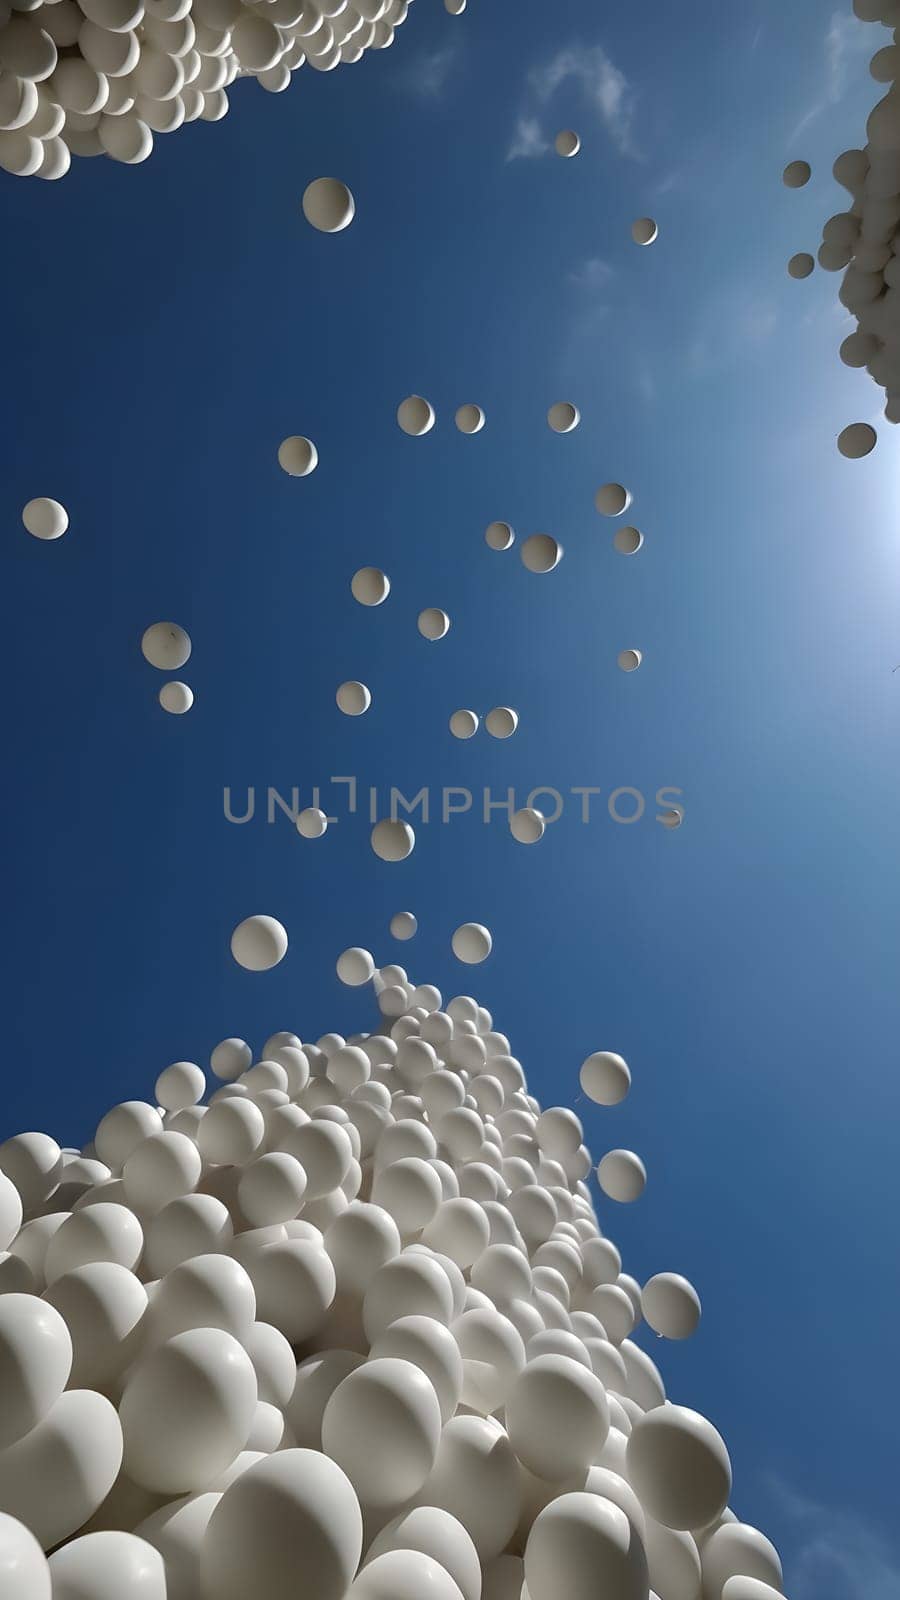 many soft white balls on blue sky background, minimalistic wallpaper. Neural network generated in May 2023. Not based on any actual person, scene or pattern.